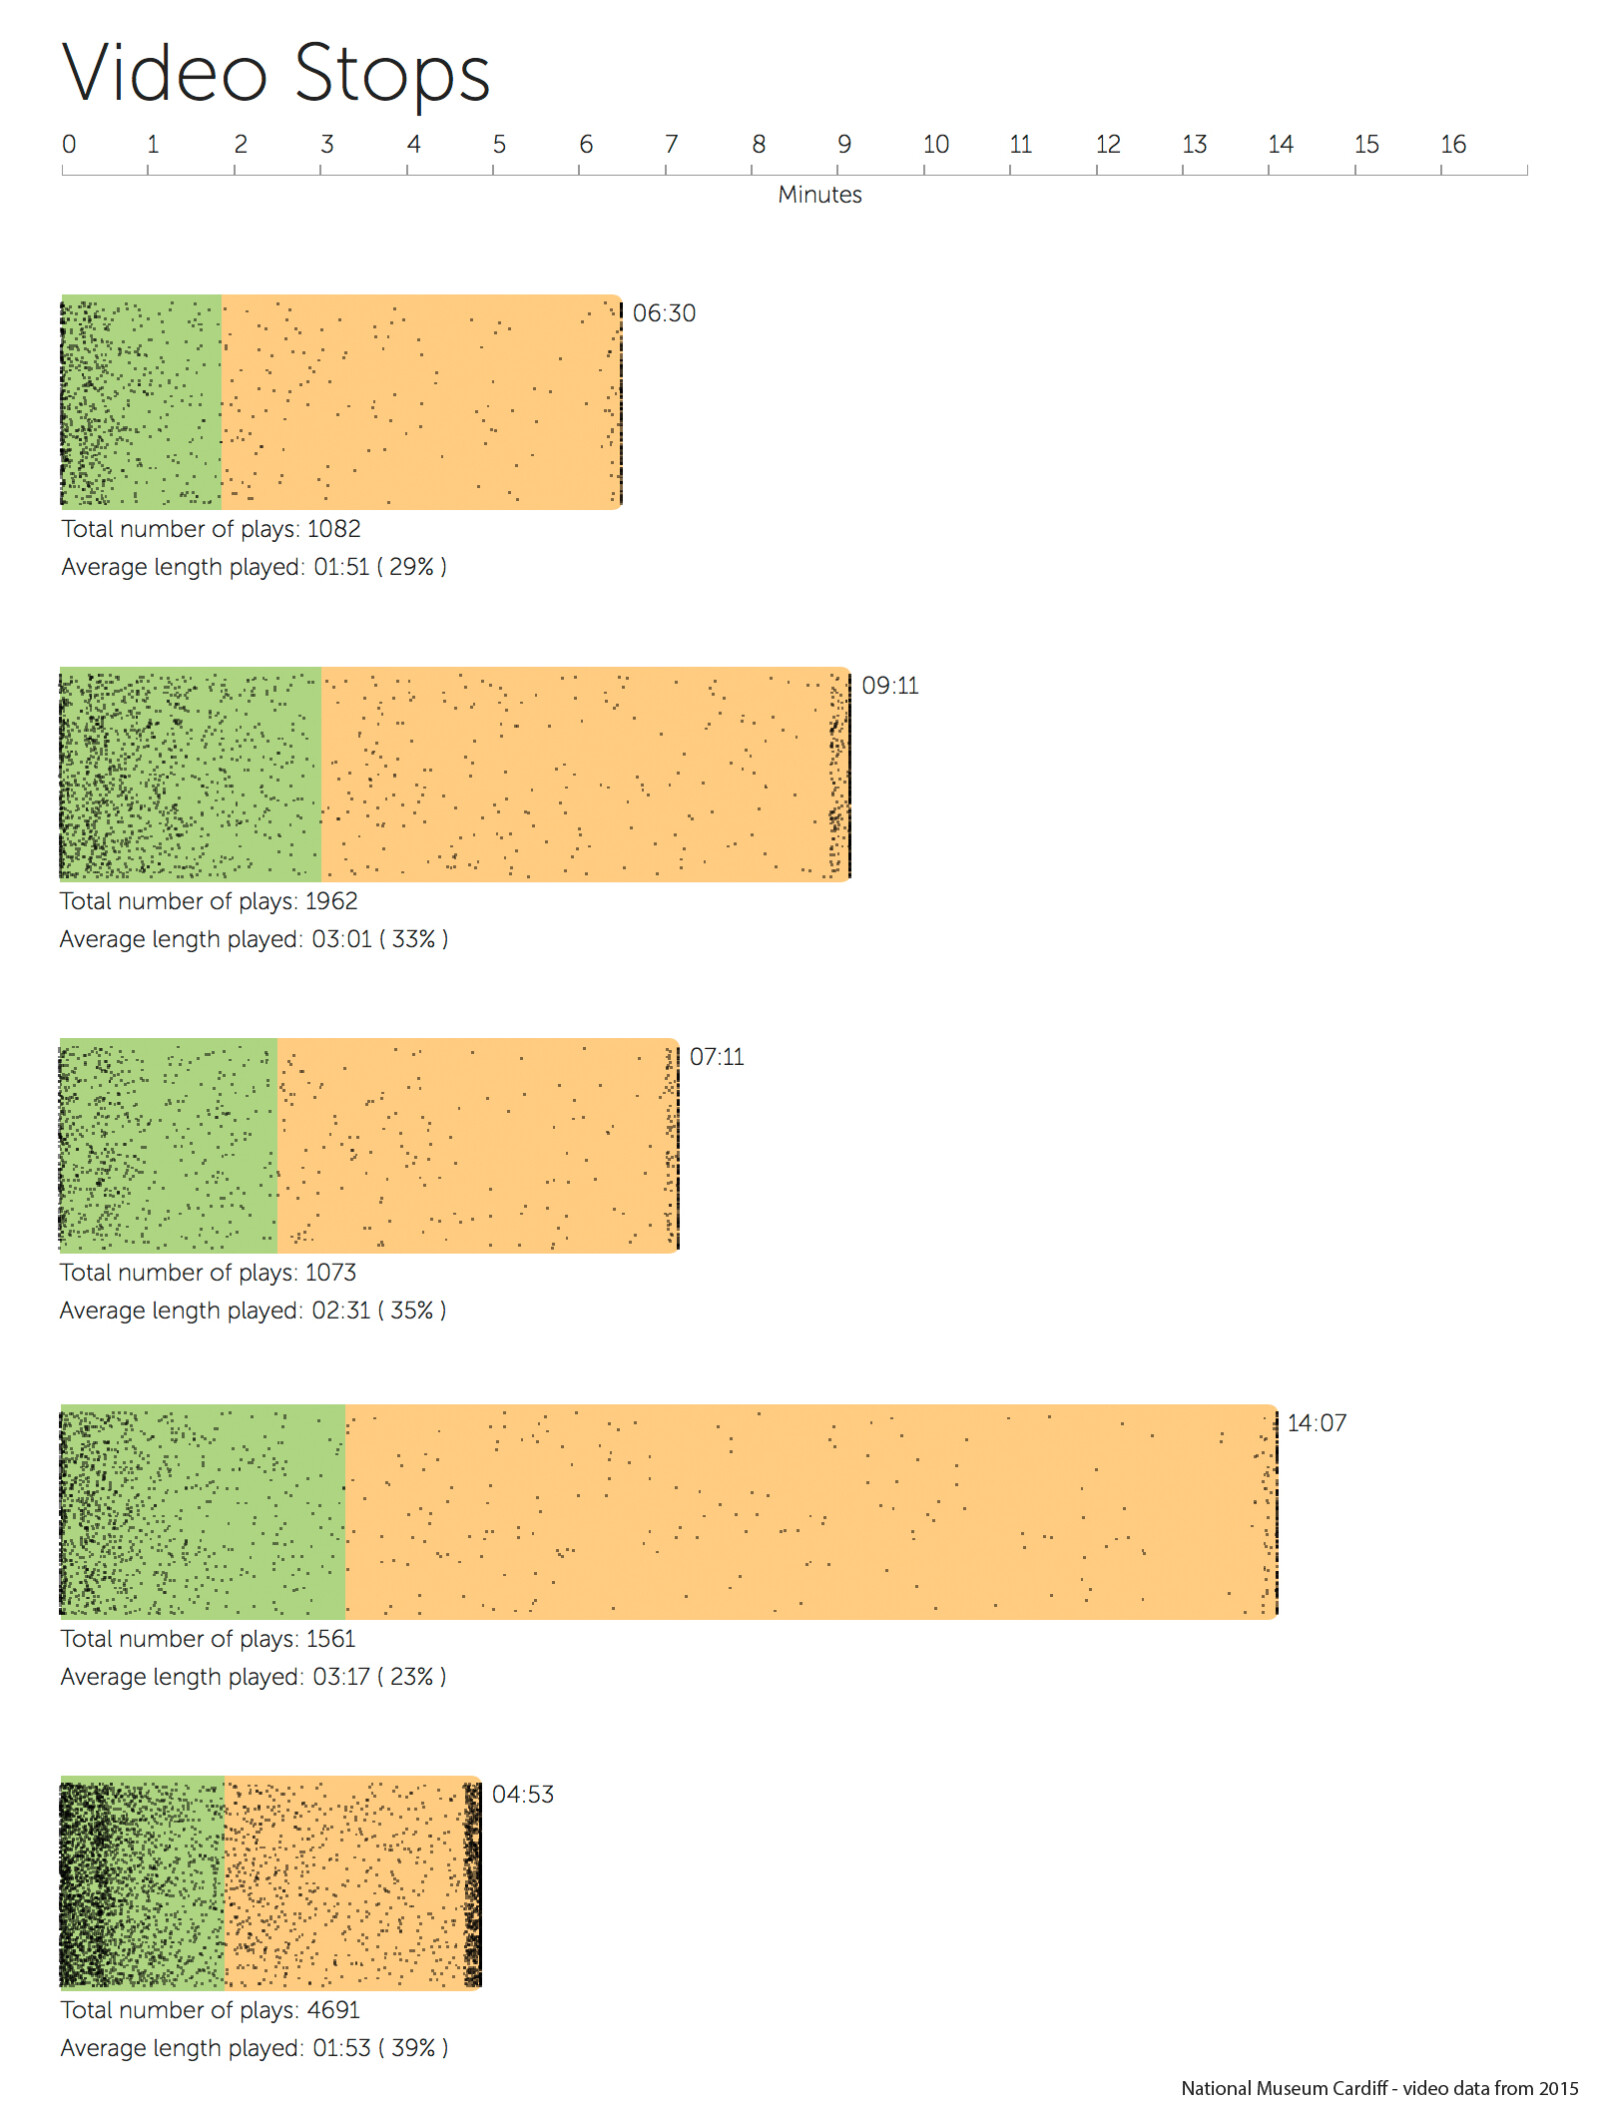 Figure 3 shows all video stop points for five videos presented as scatter plots against the video length in minutes.